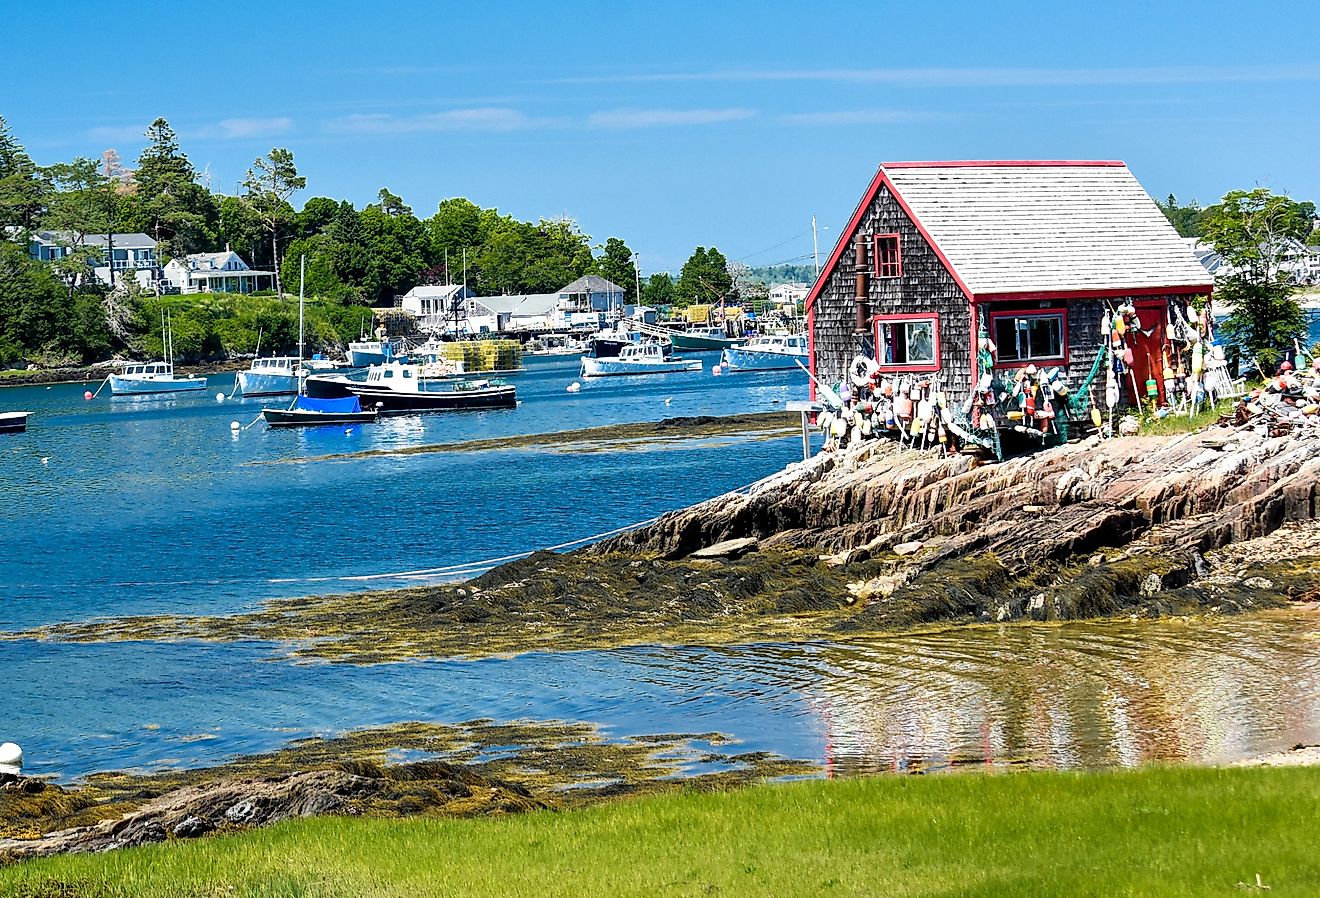 Summer in Harpswell, Maine.